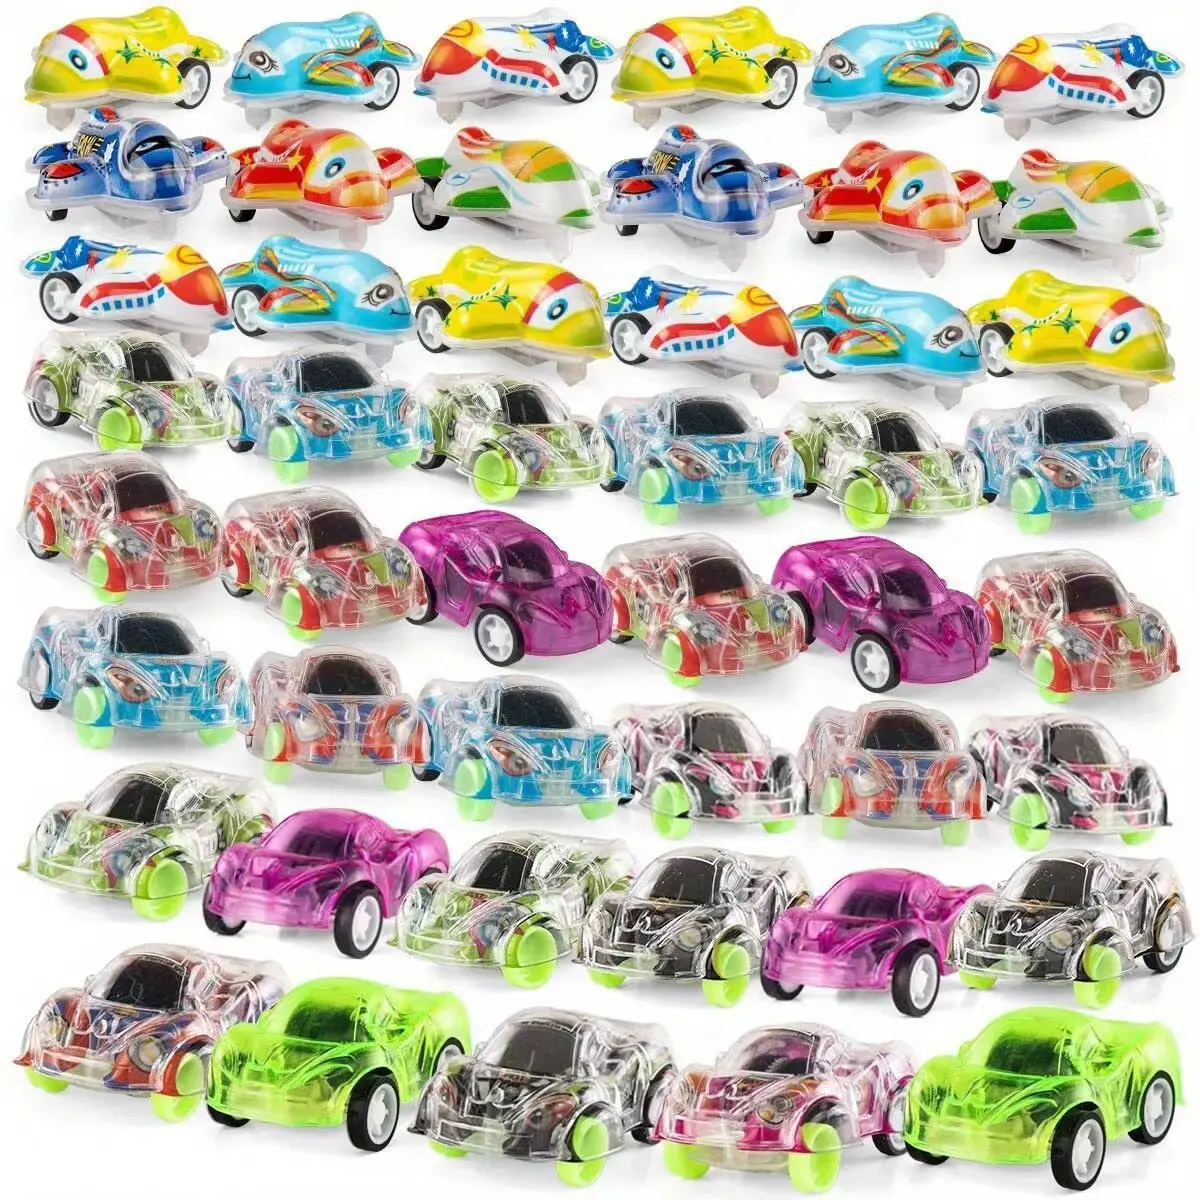 New transparent wind-up animal mini clockwork car children's toys boomerang plastic small plane holiday activities gifts